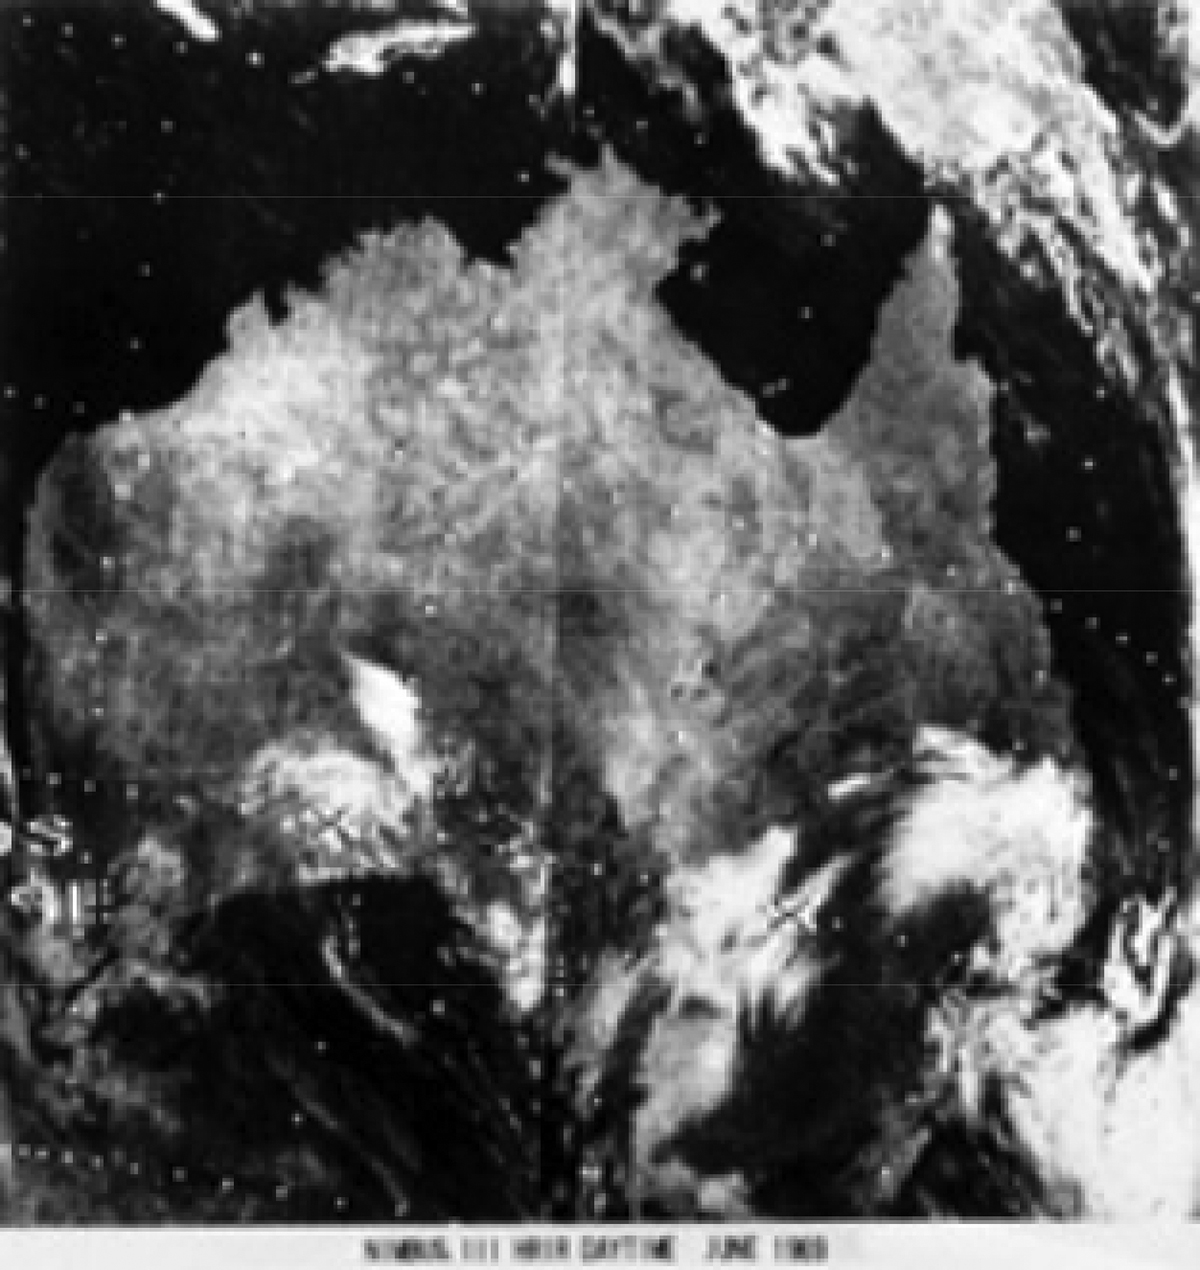 Nimbus-3 view of Australia from 1969. The image looks very old, in black and white. It's very grainy. 